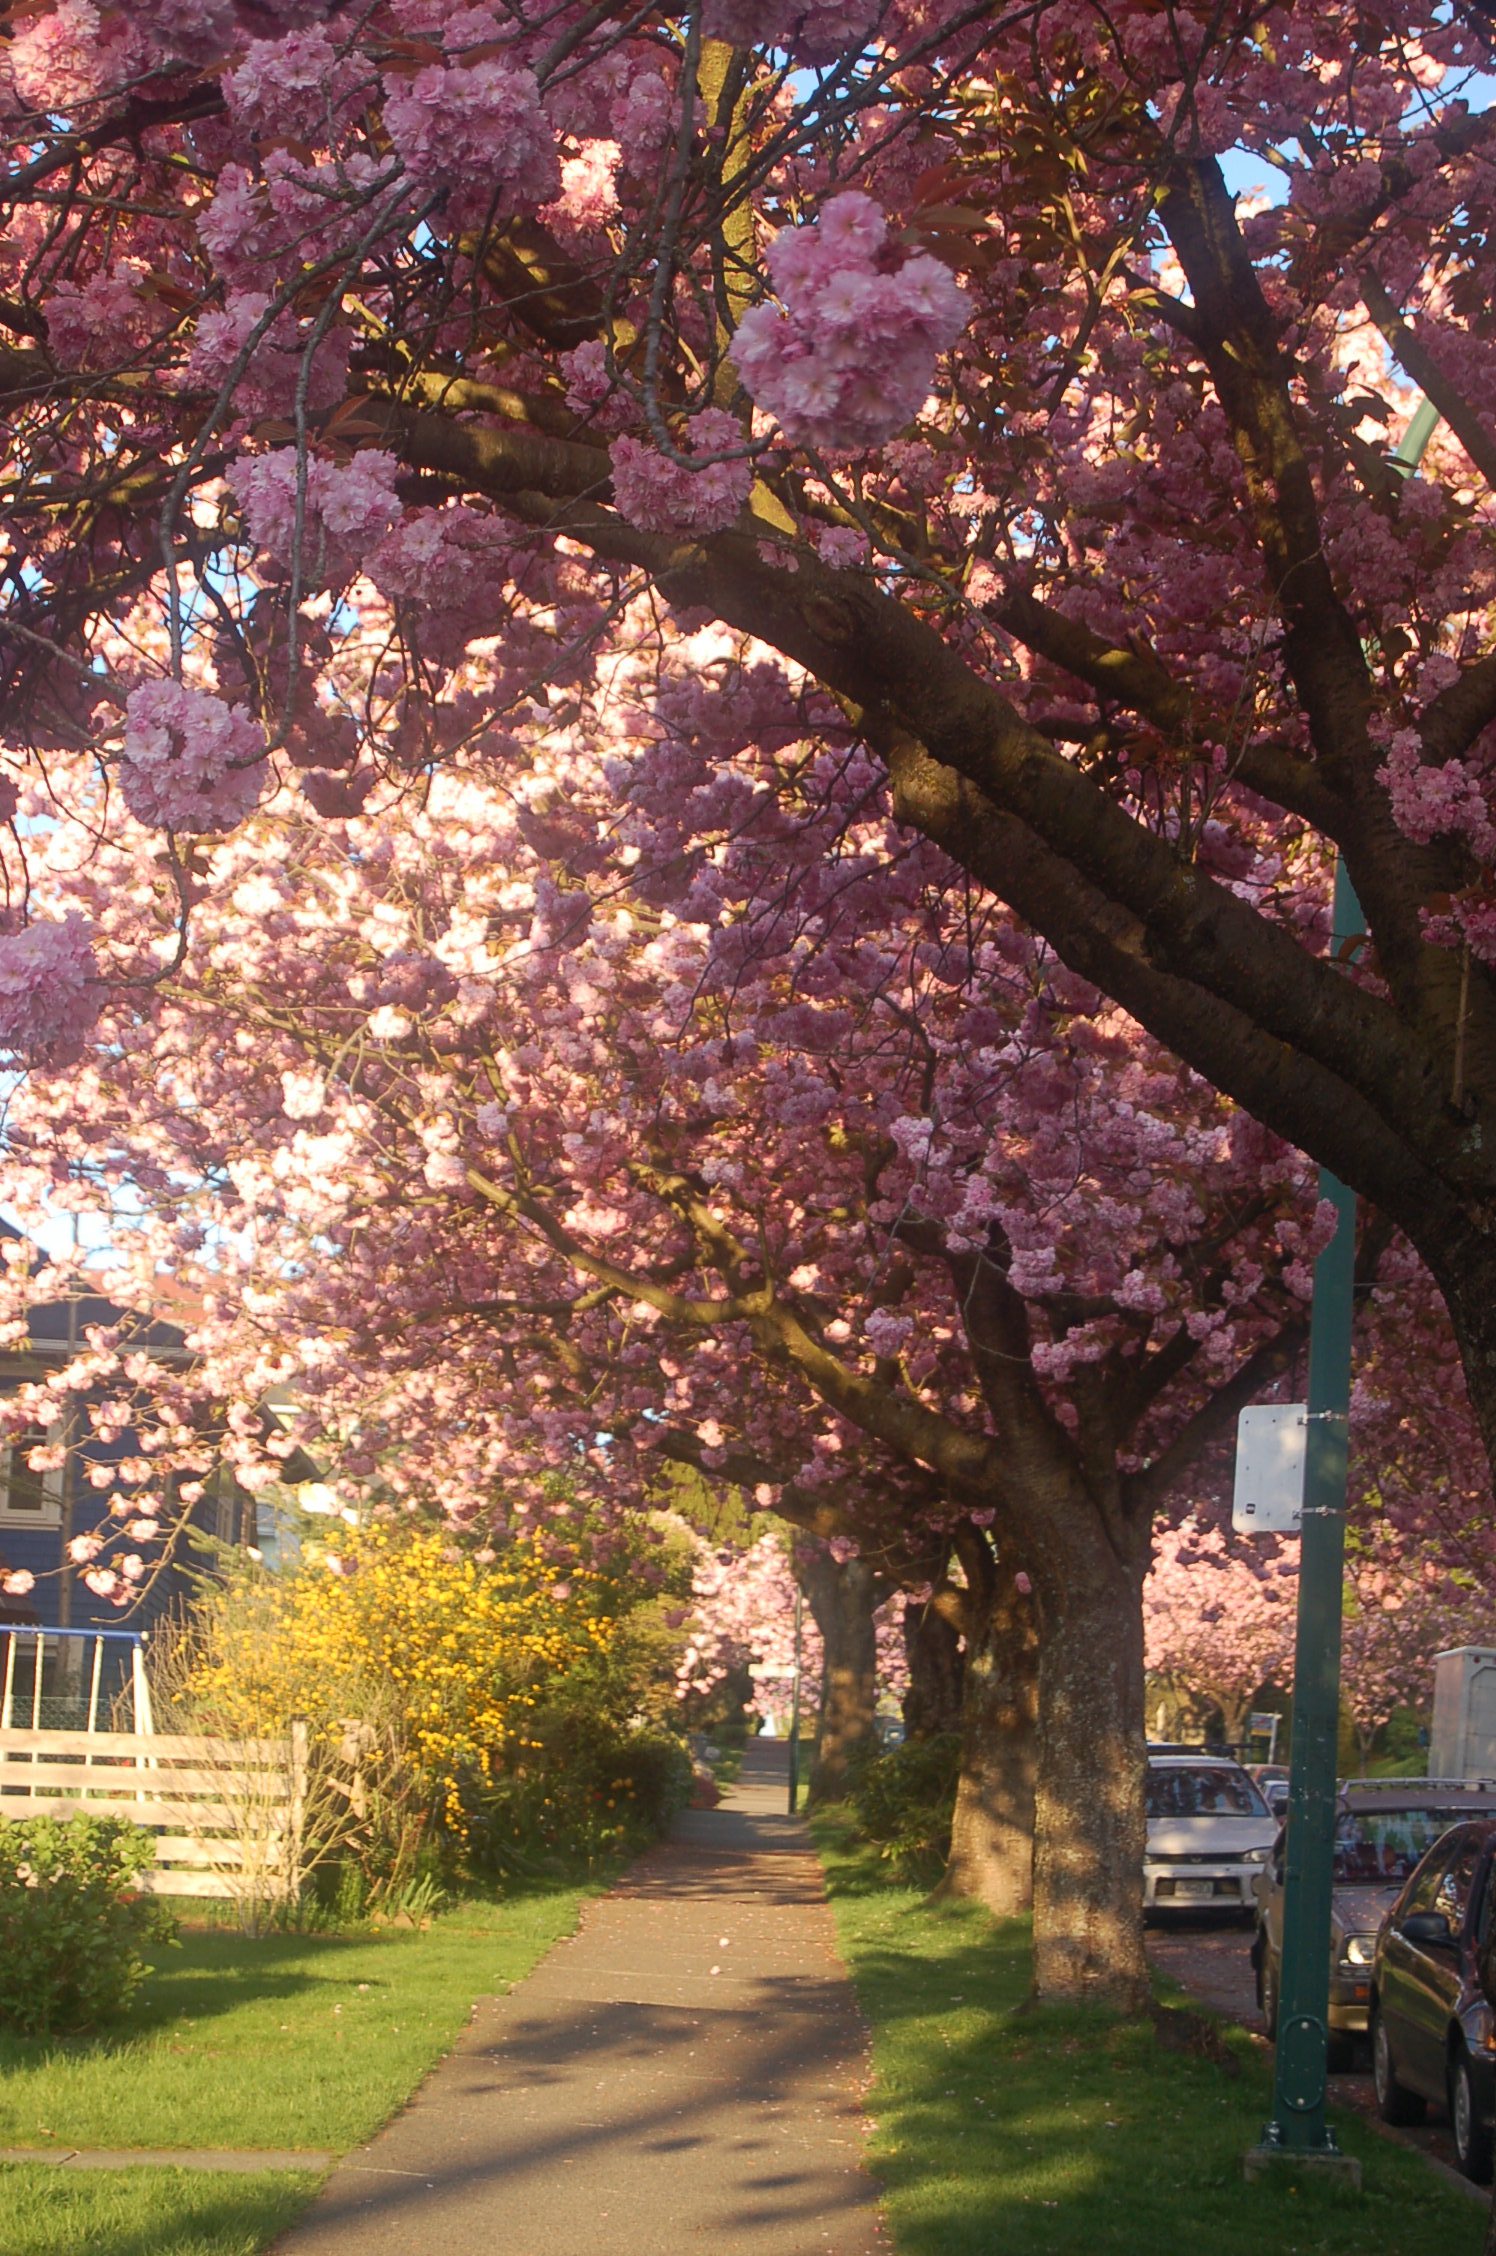 beeandthistle » Blog Archive » Vancouver Cherry Blossom Time – Could ...